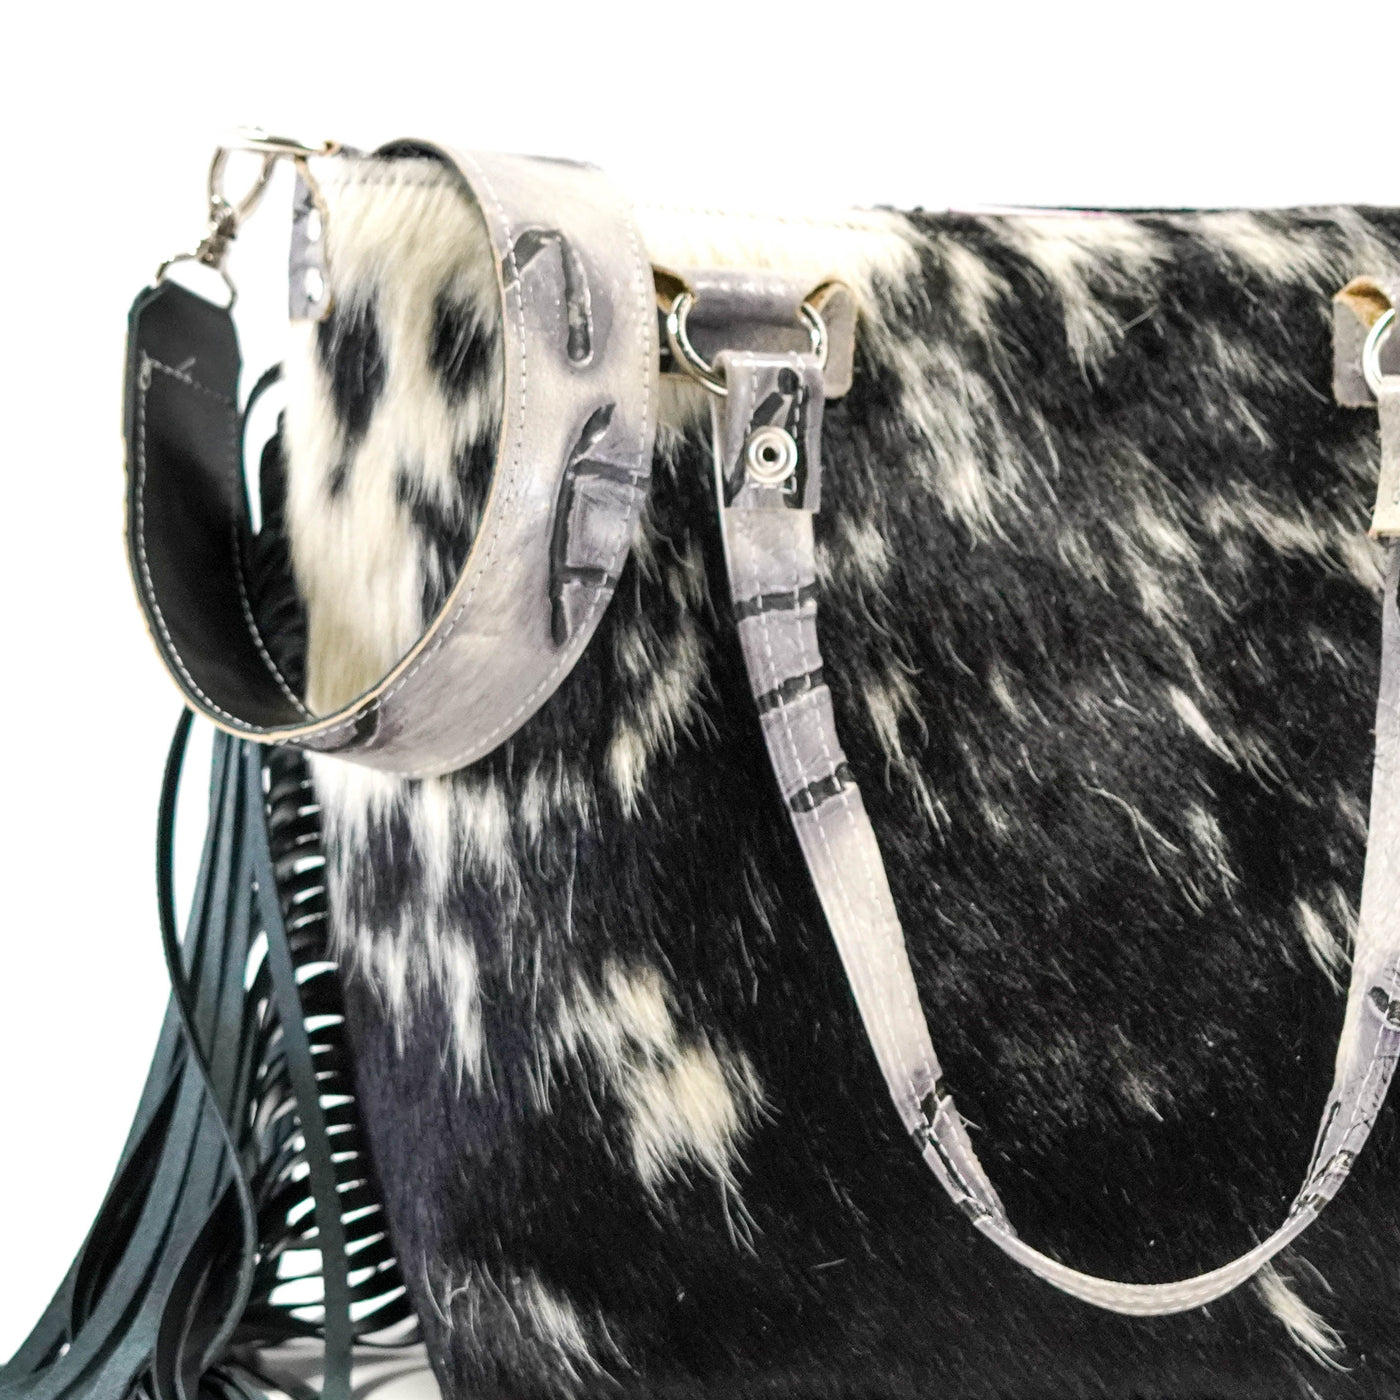 Taylor - Black & White w/ Smoke Show Brands-Taylor-Western-Cowhide-Bags-Handmade-Products-Gifts-Dancing Cactus Designs